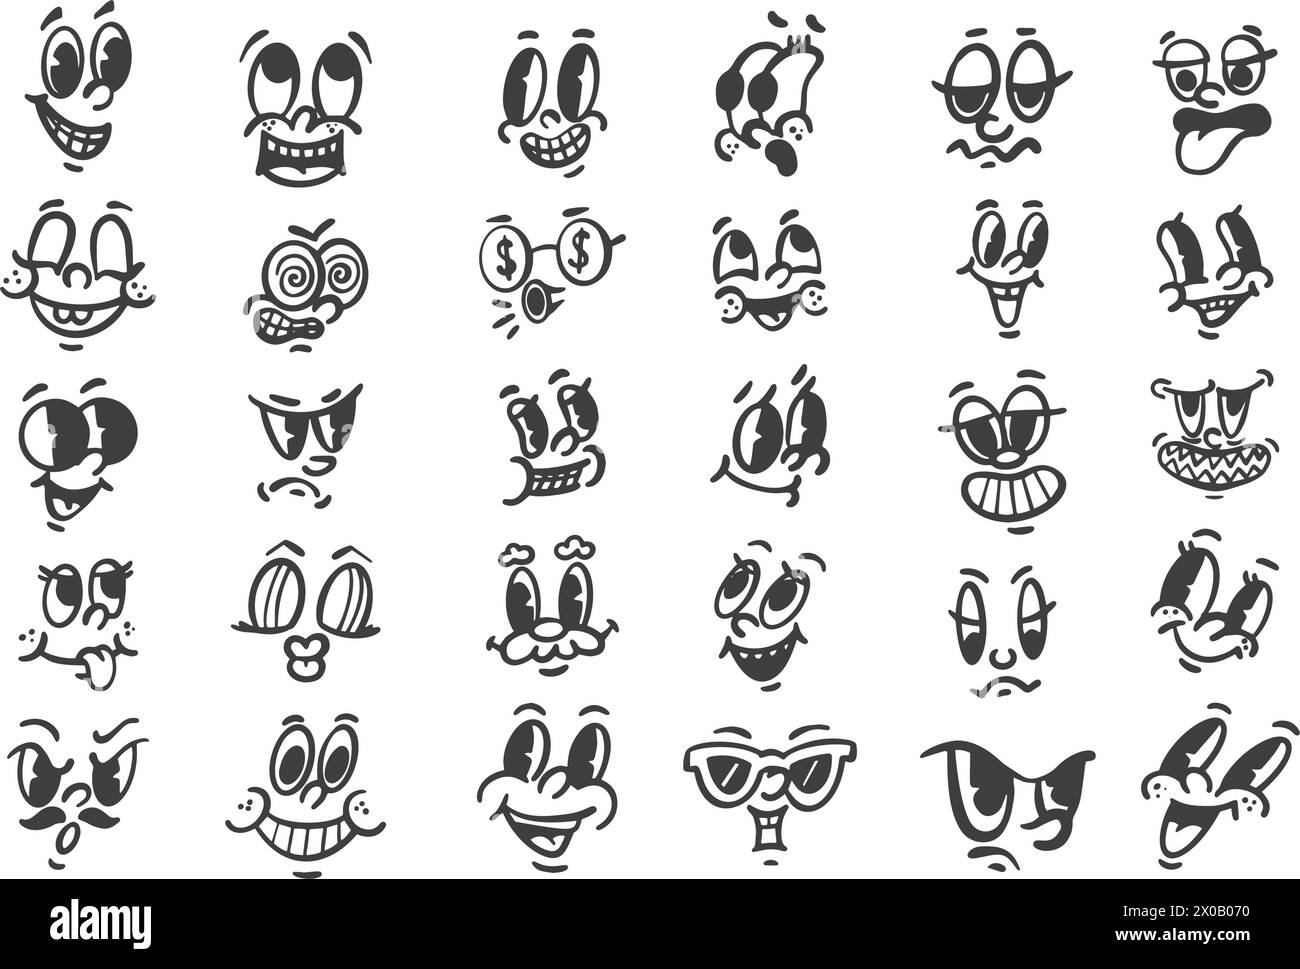 Cartoon retro faces. Vintage mascots with comic cute eyes and mouths. Funny icons set of happy smiling character expressions. 30-50s design emotions Stock Vector